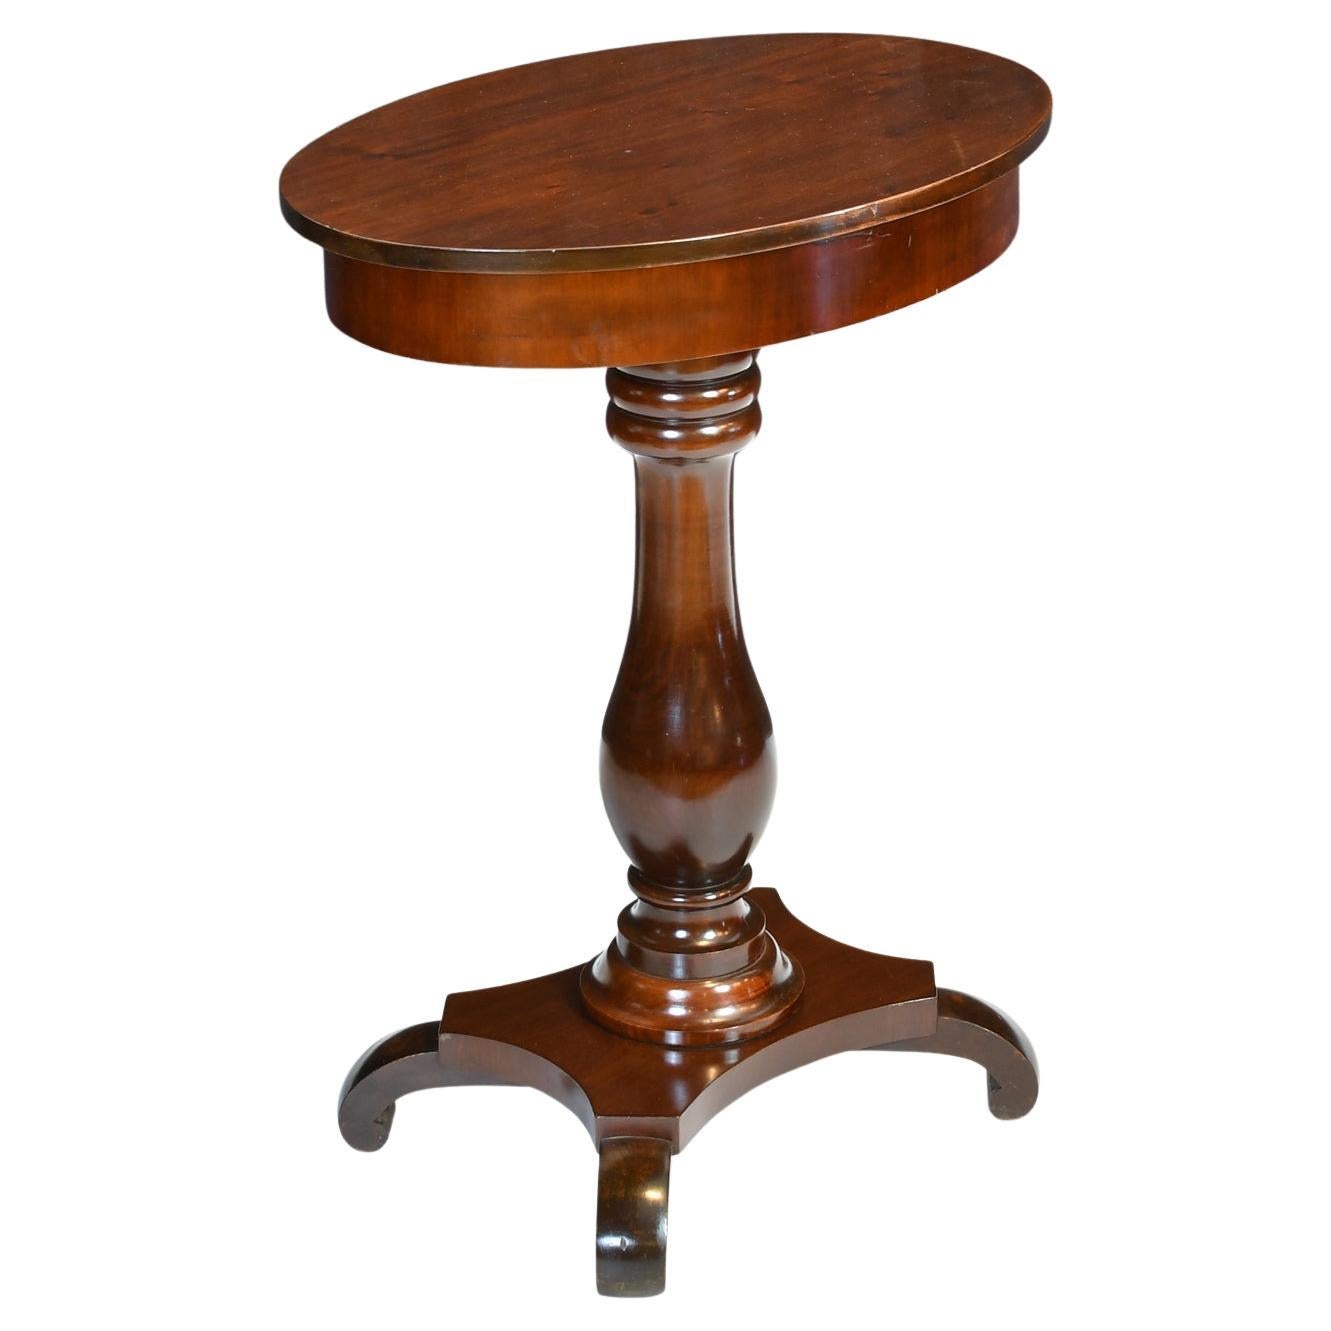 Small Antique Oval Pedestal Table or Work Table in Dark-Stained Mahogany In Good Condition For Sale In Miami, FL